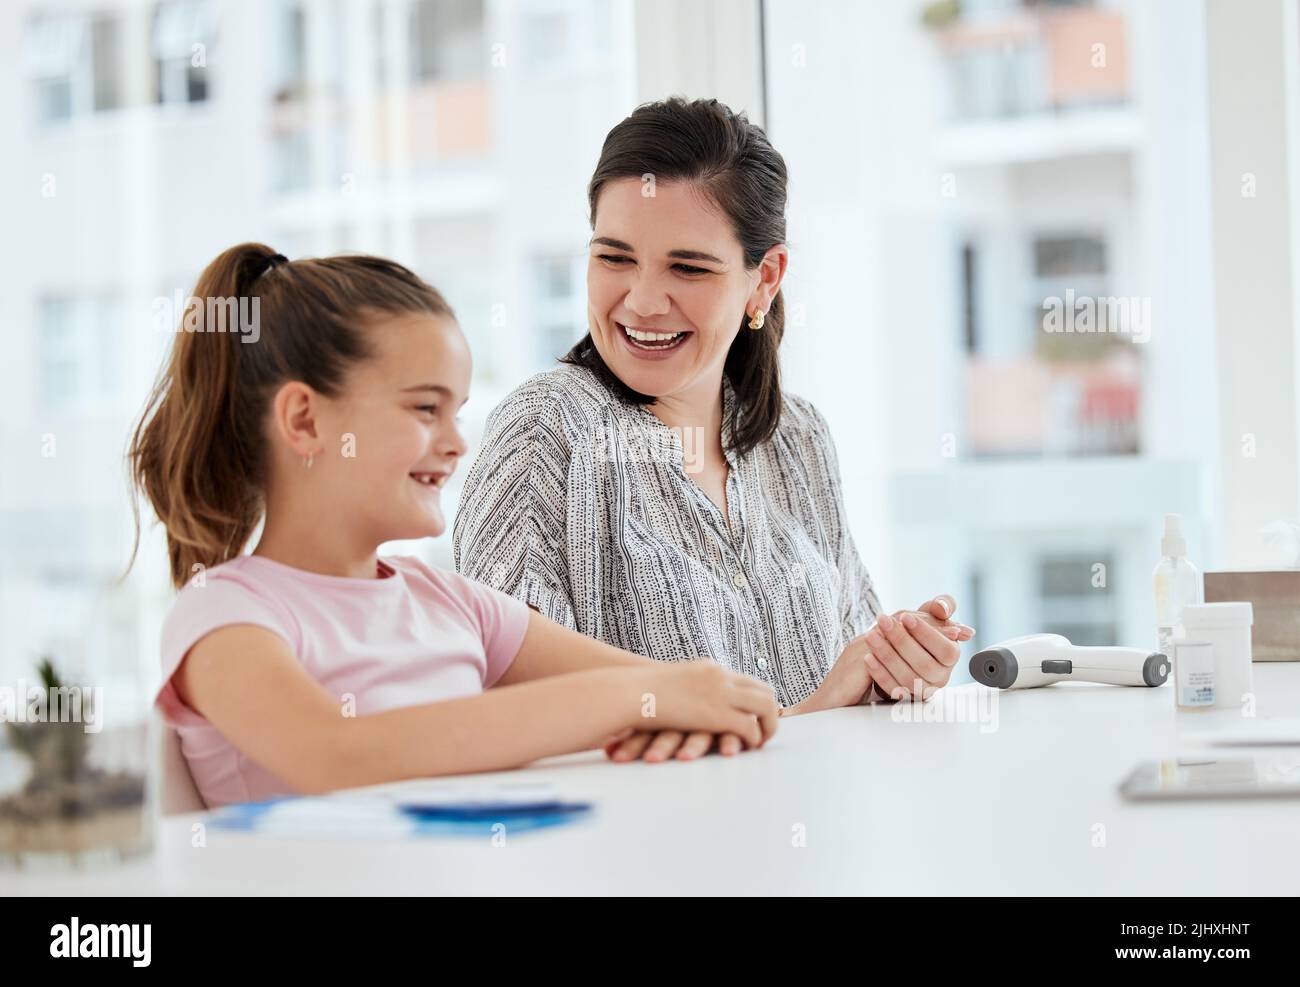 Are you ready for this. a mother and daughter at a checkup at a hospital. Stock Photo